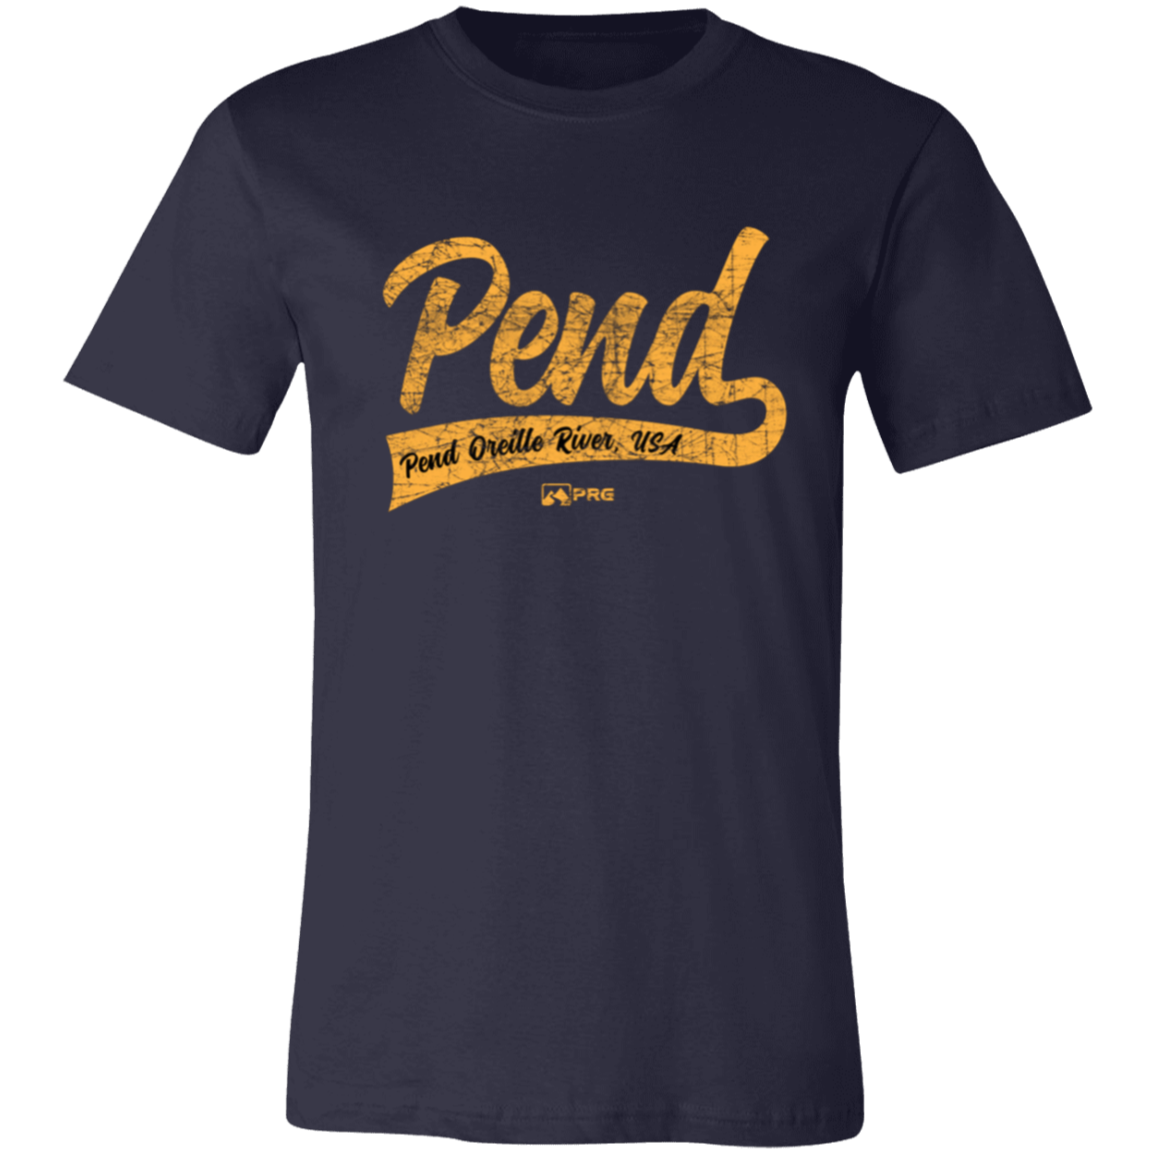 Pend for the Pennant - Shirt